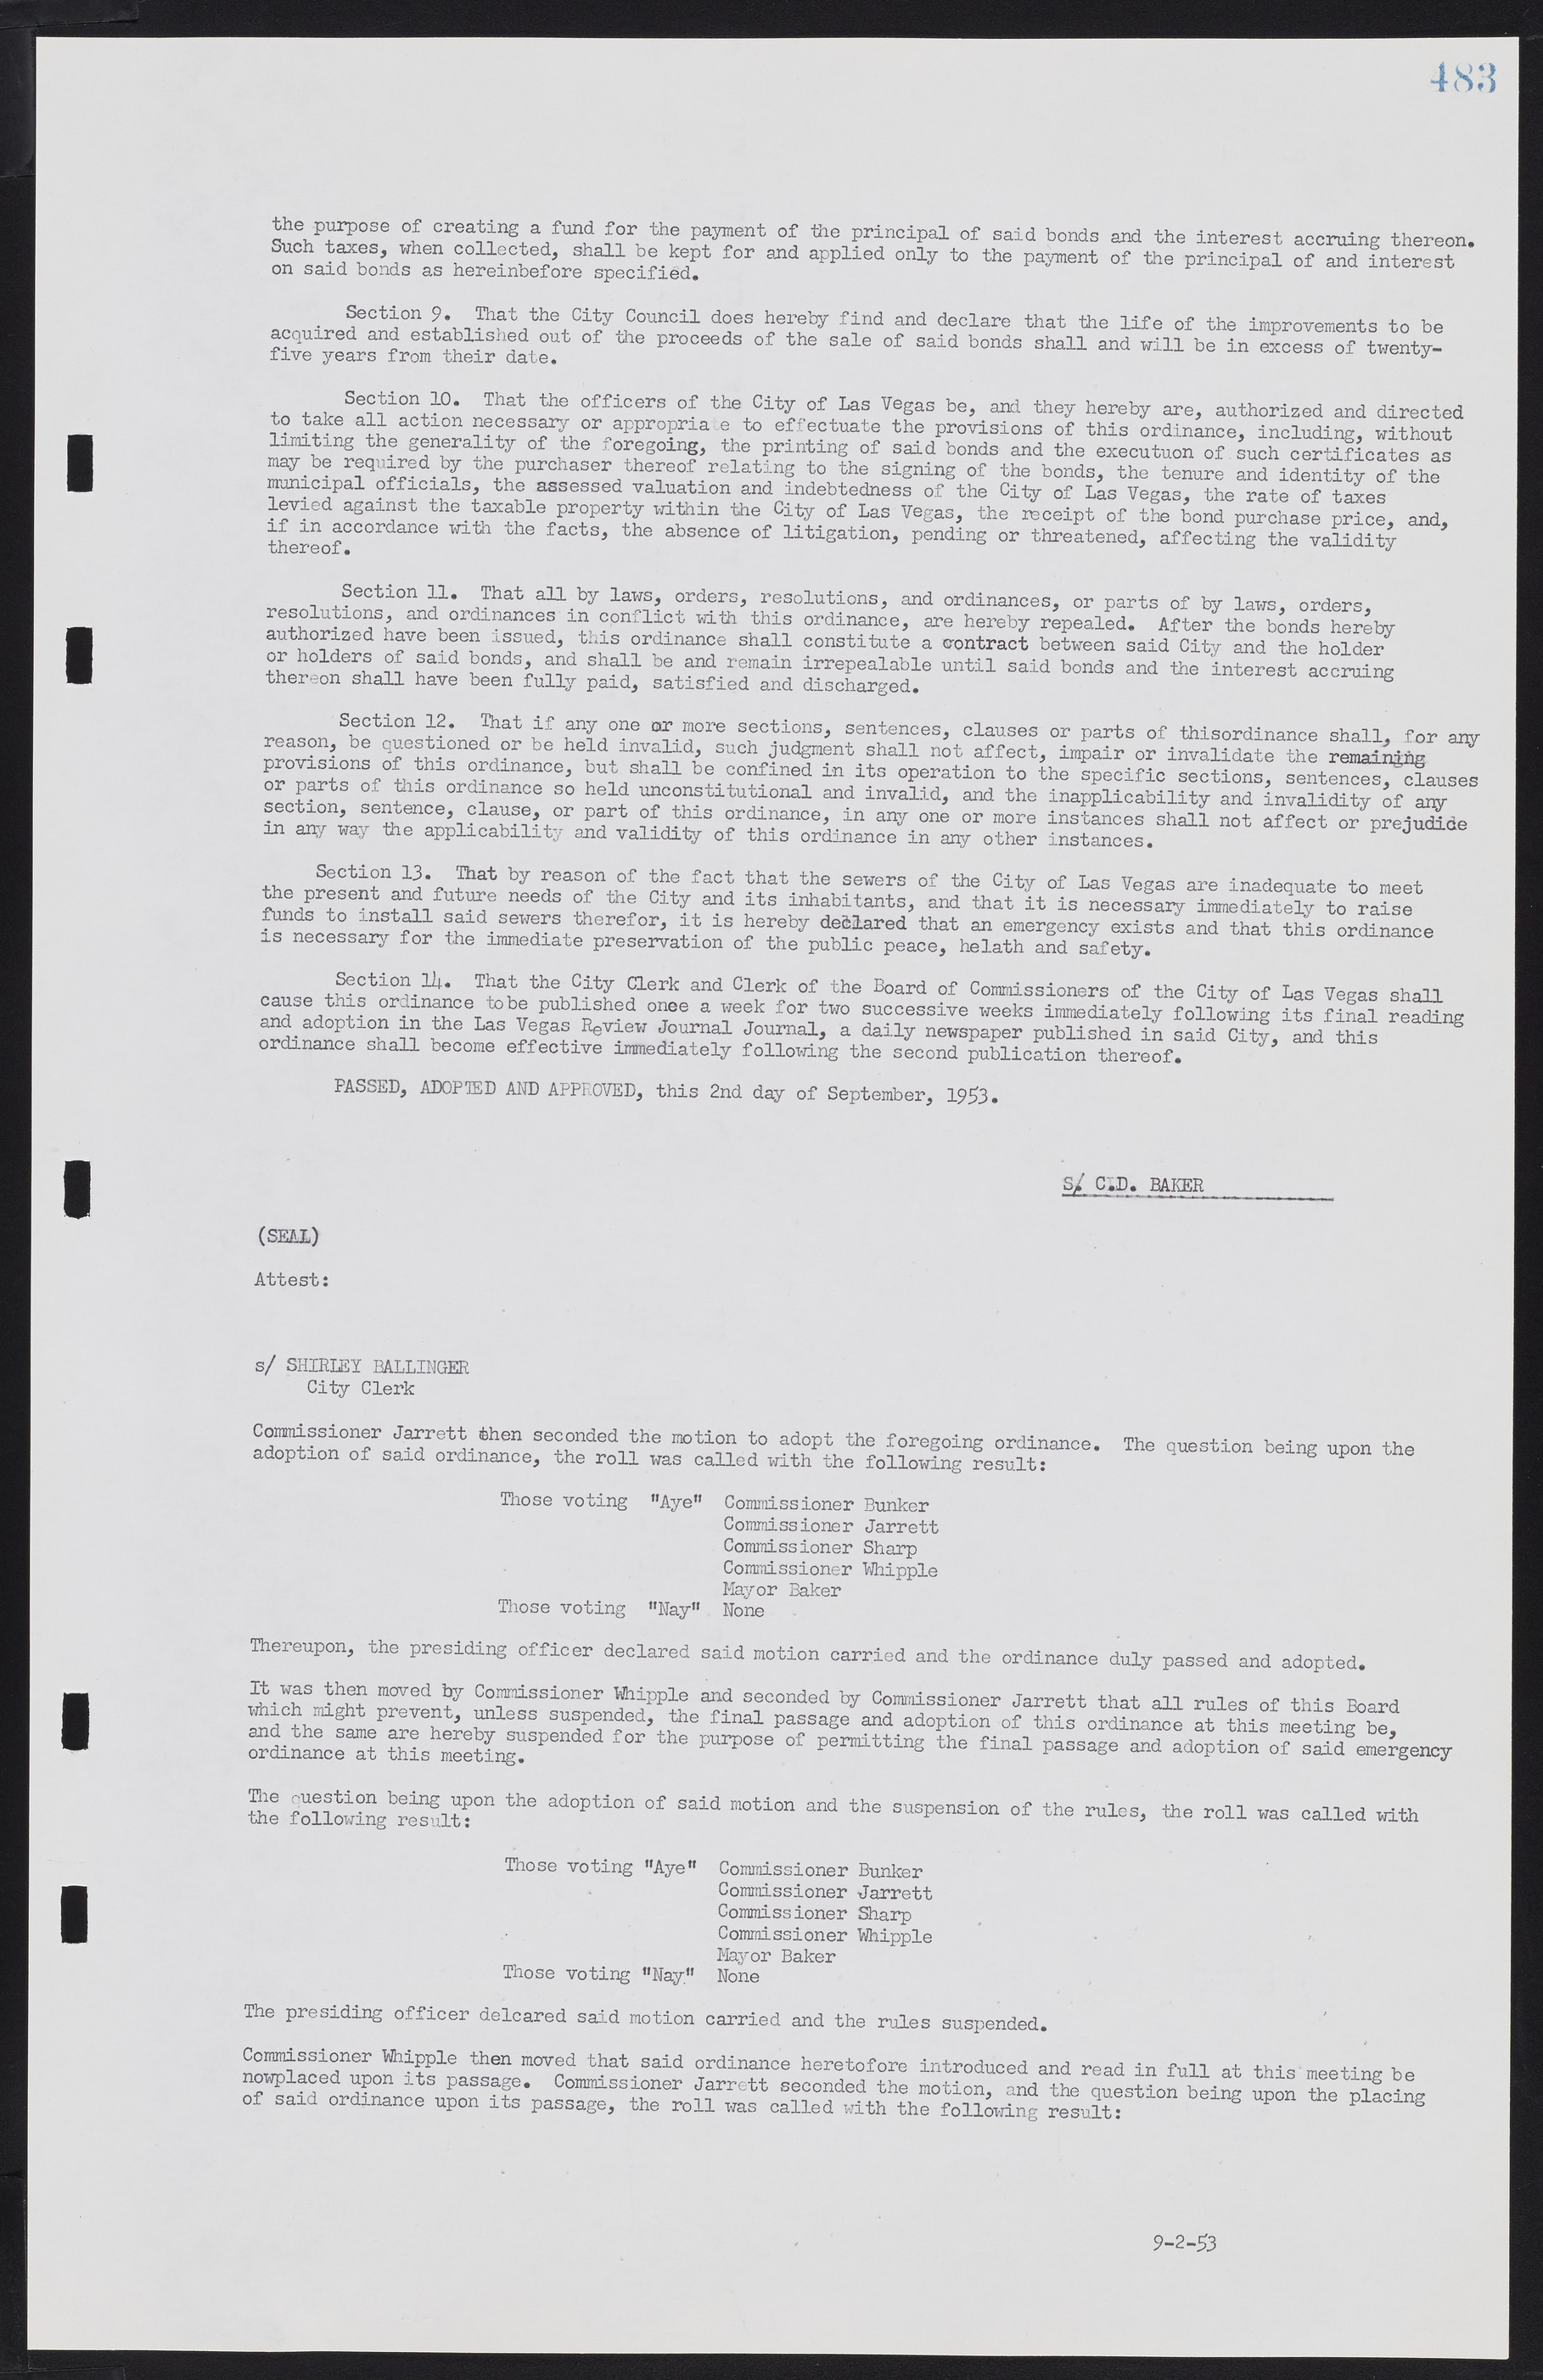 Las Vegas City Commission Minutes, May 26, 1952 to February 17, 1954, lvc000008-513